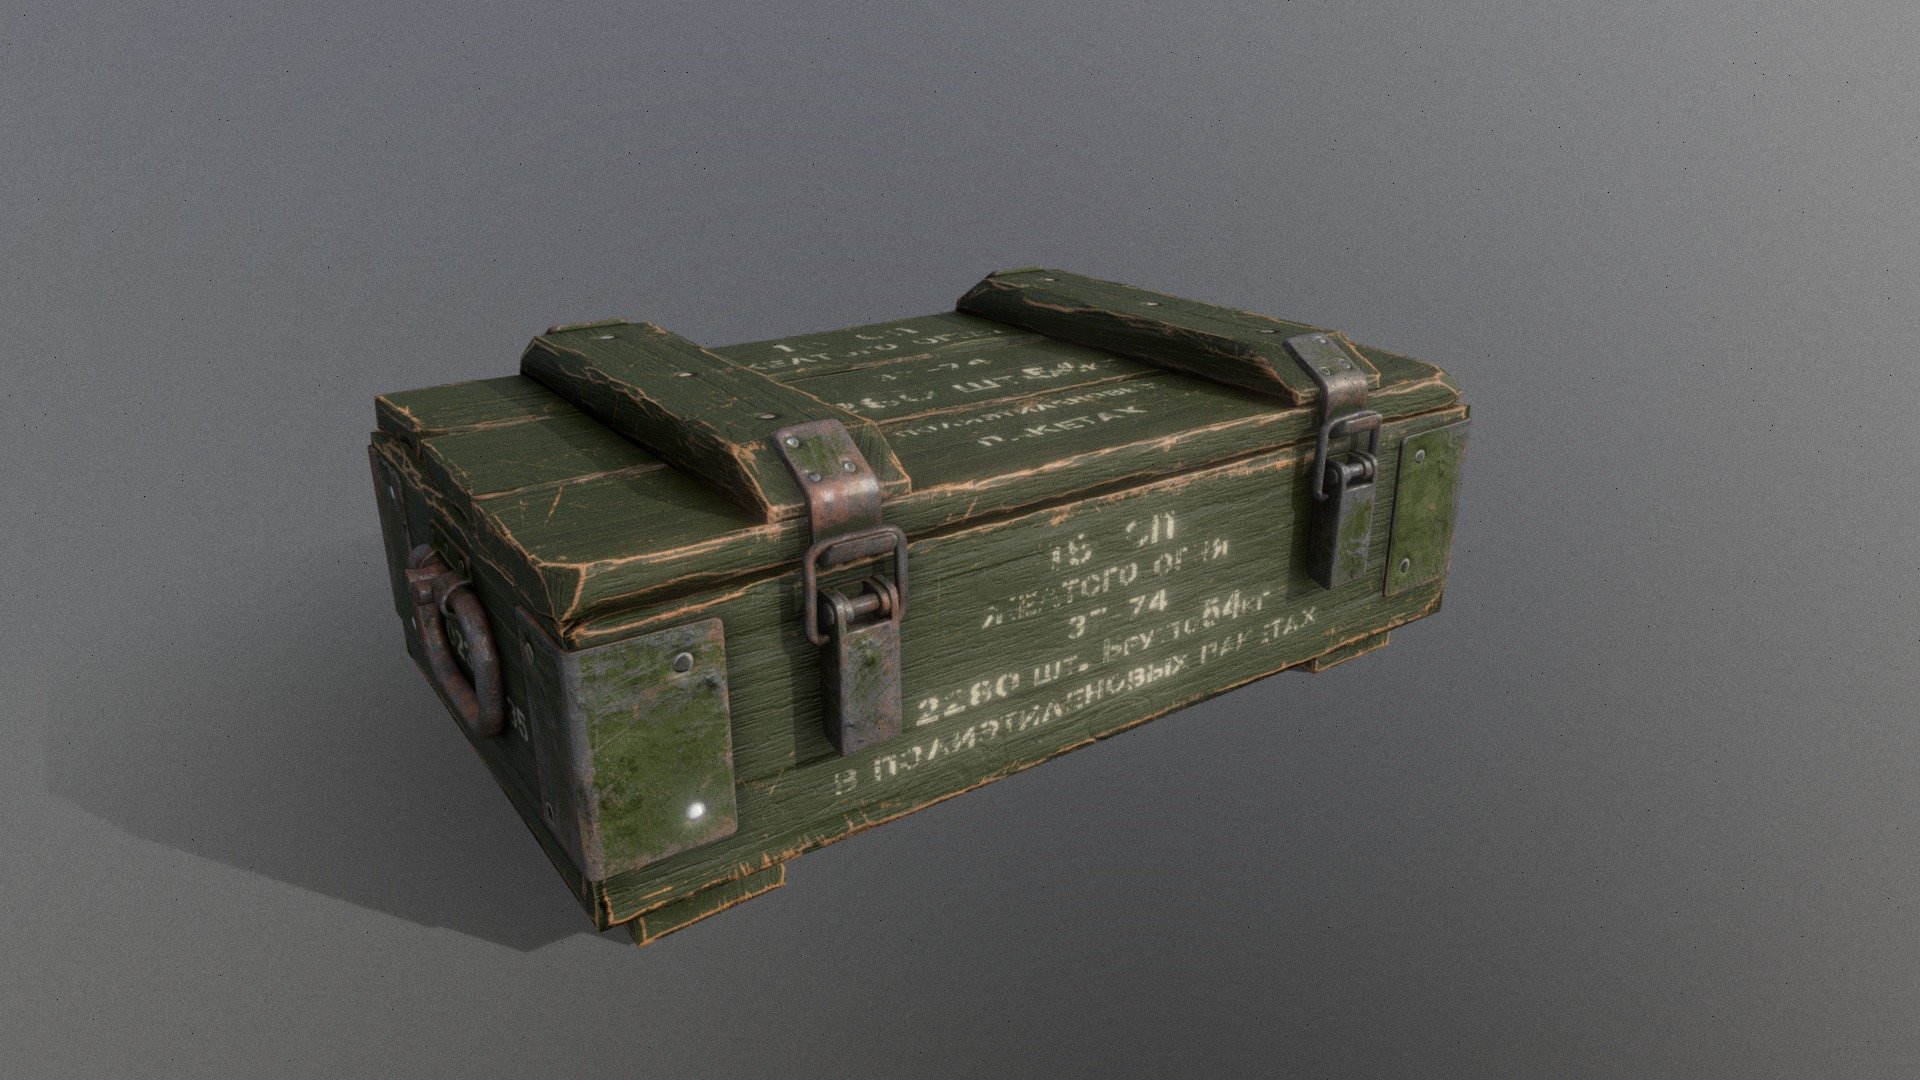 Used, old, worn Soviet Crate for weapons or ammunition.

Opening and closing animations included.

Game Ready, 5.5k Tris, up to 4k Textures 3d model